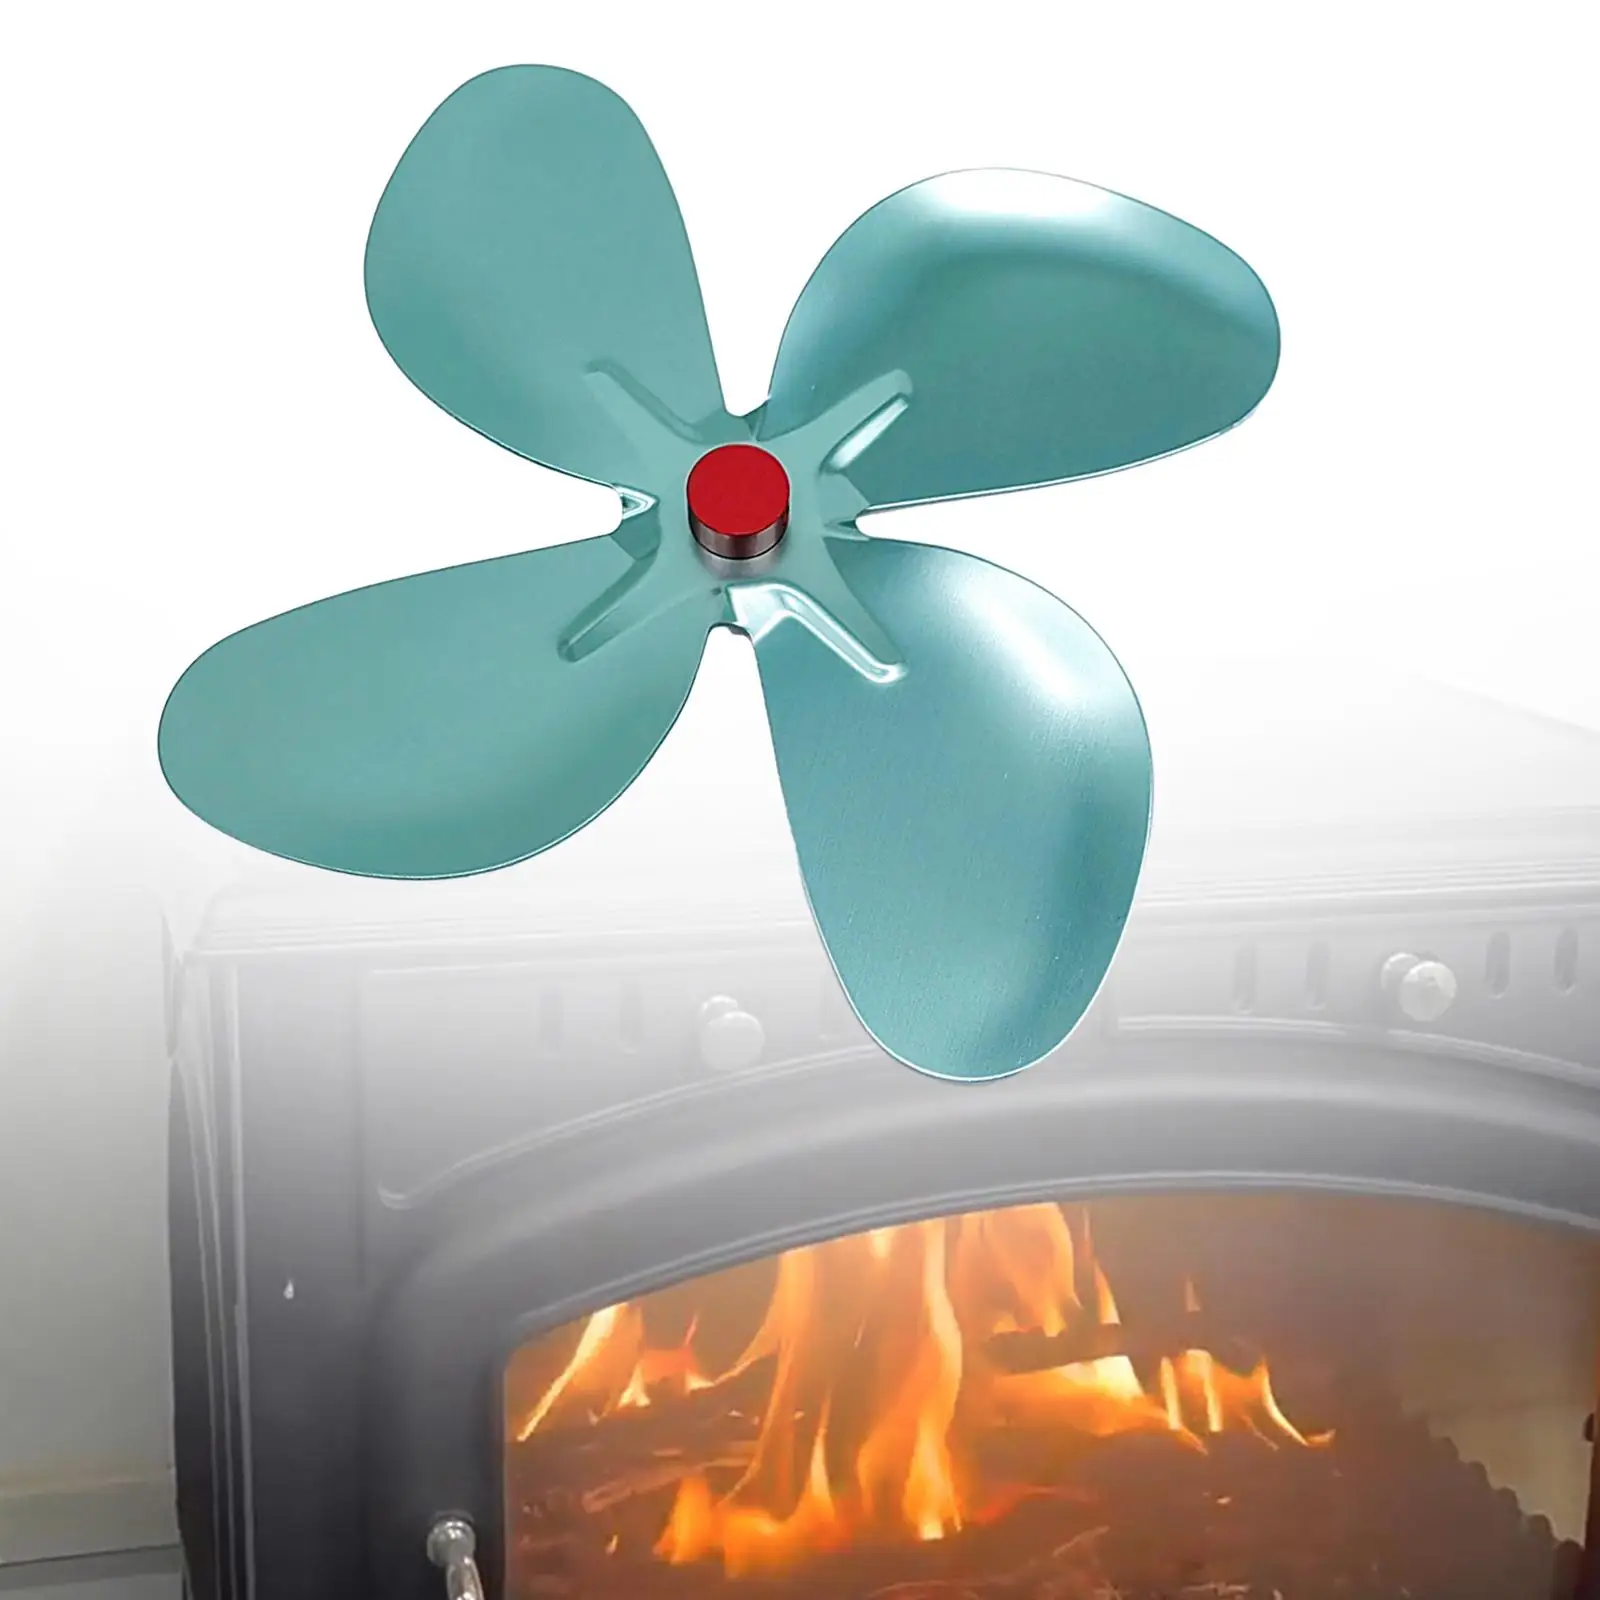 Stoves Fan Blade 17.5cm Upgraded Fireplace Spare Parts Quiet Circulating Warm Airs More Warm Fans Fan Blade Replacement